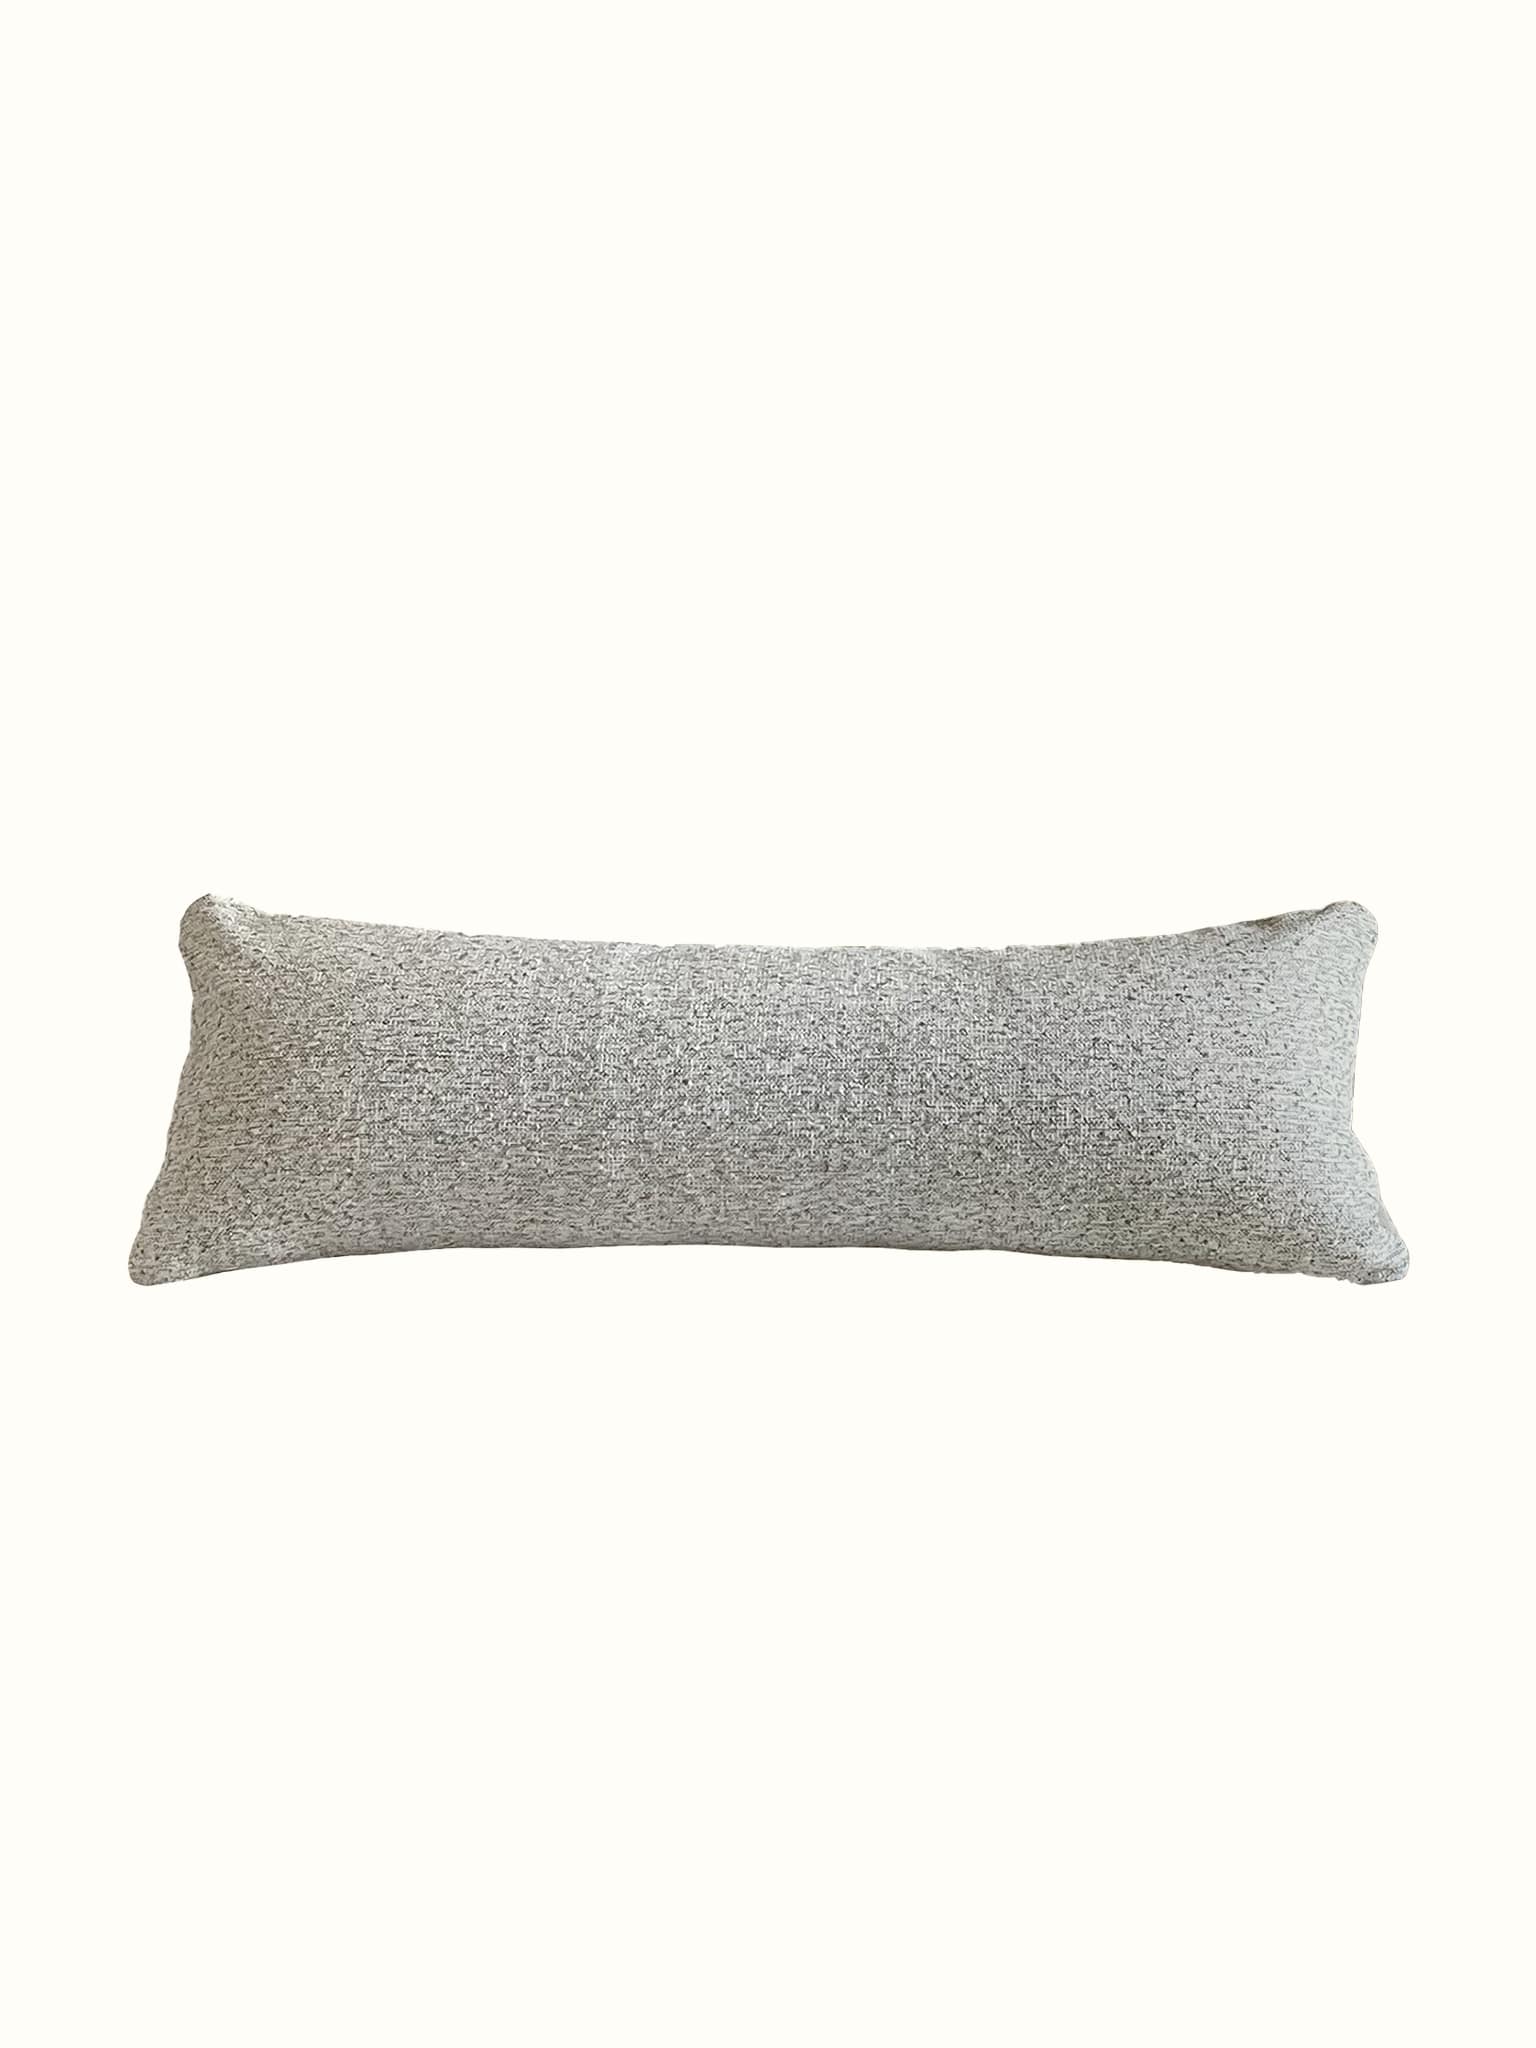 Oversized lumbar pillow at Cielle Home in speckled brown interwoven boucle fabric